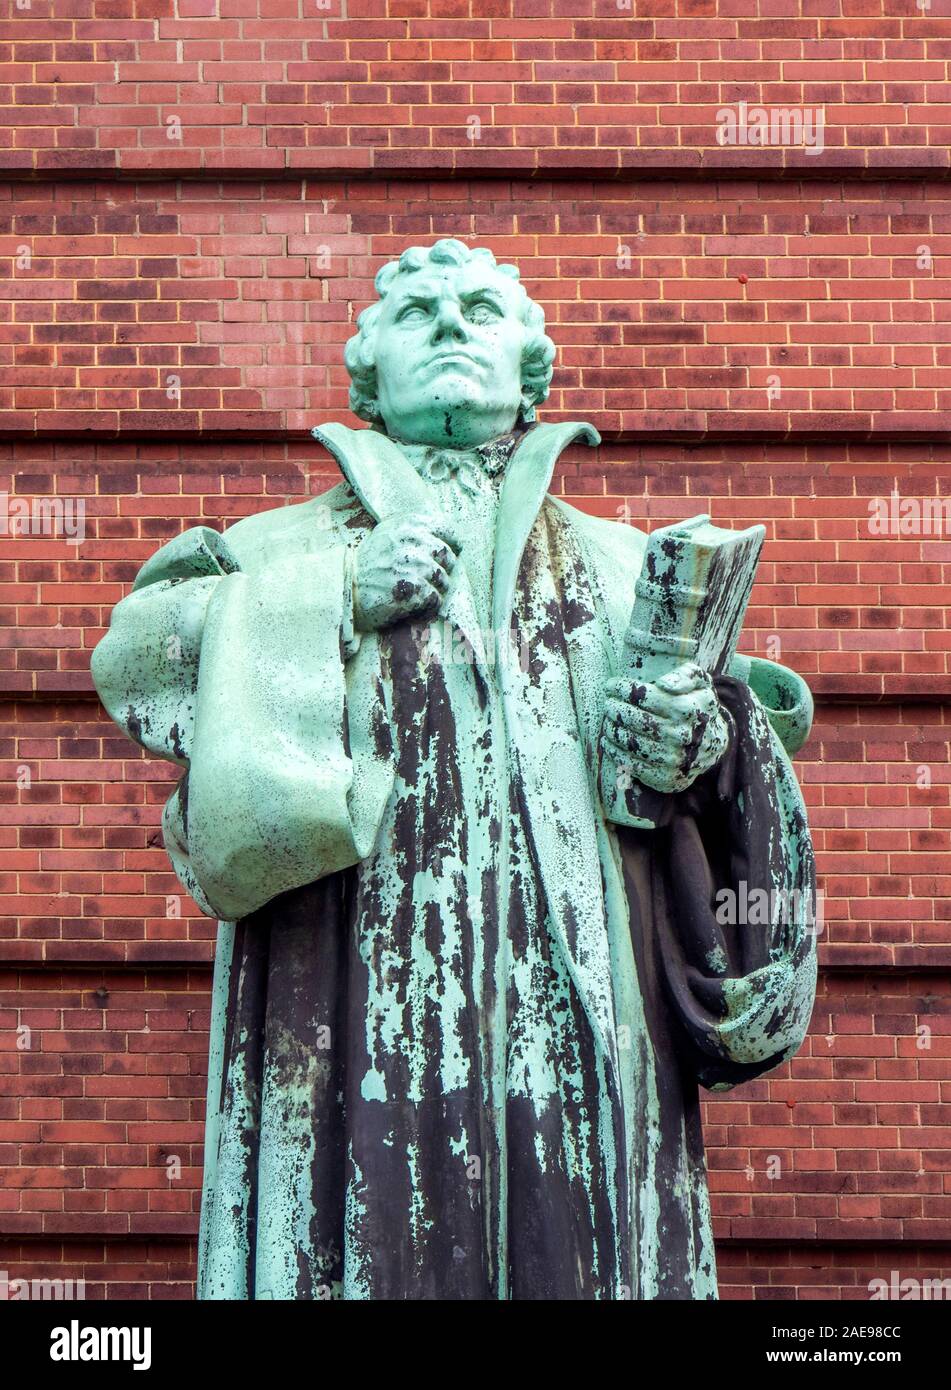 Statue Monument to Martin Luther by Otto Lessing sculptor by St Michael's Protestant Lutheran church Hamburg Germany Stock Photo